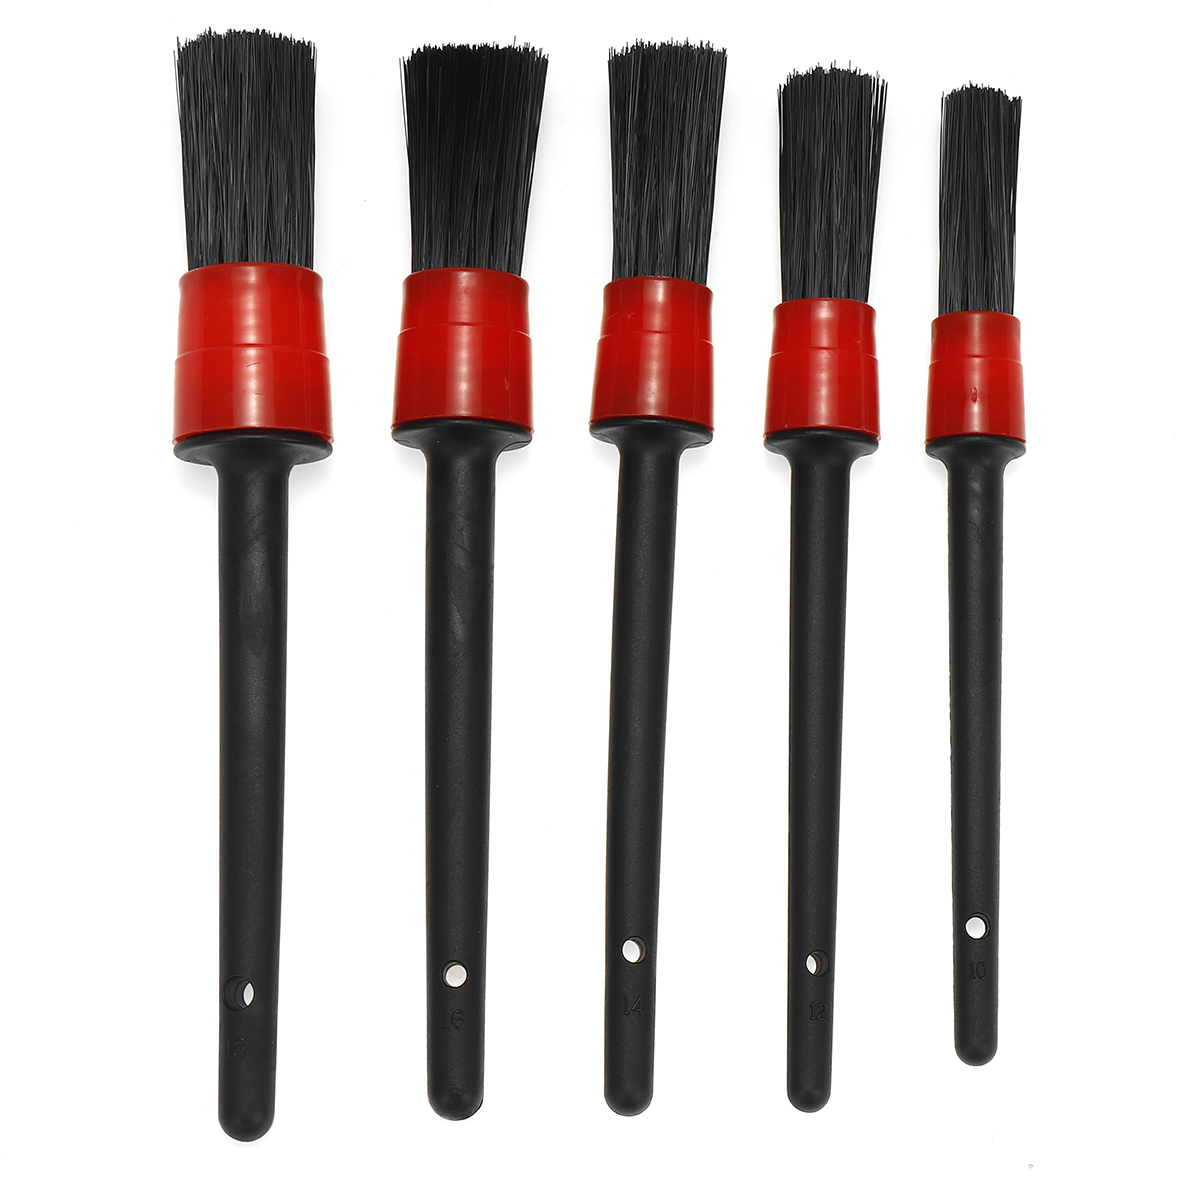 Dirt Dust Brush Car Cleaning Detailing Brush Set for Car Motorcycle Interior Exterior Leather Air Vents Clean